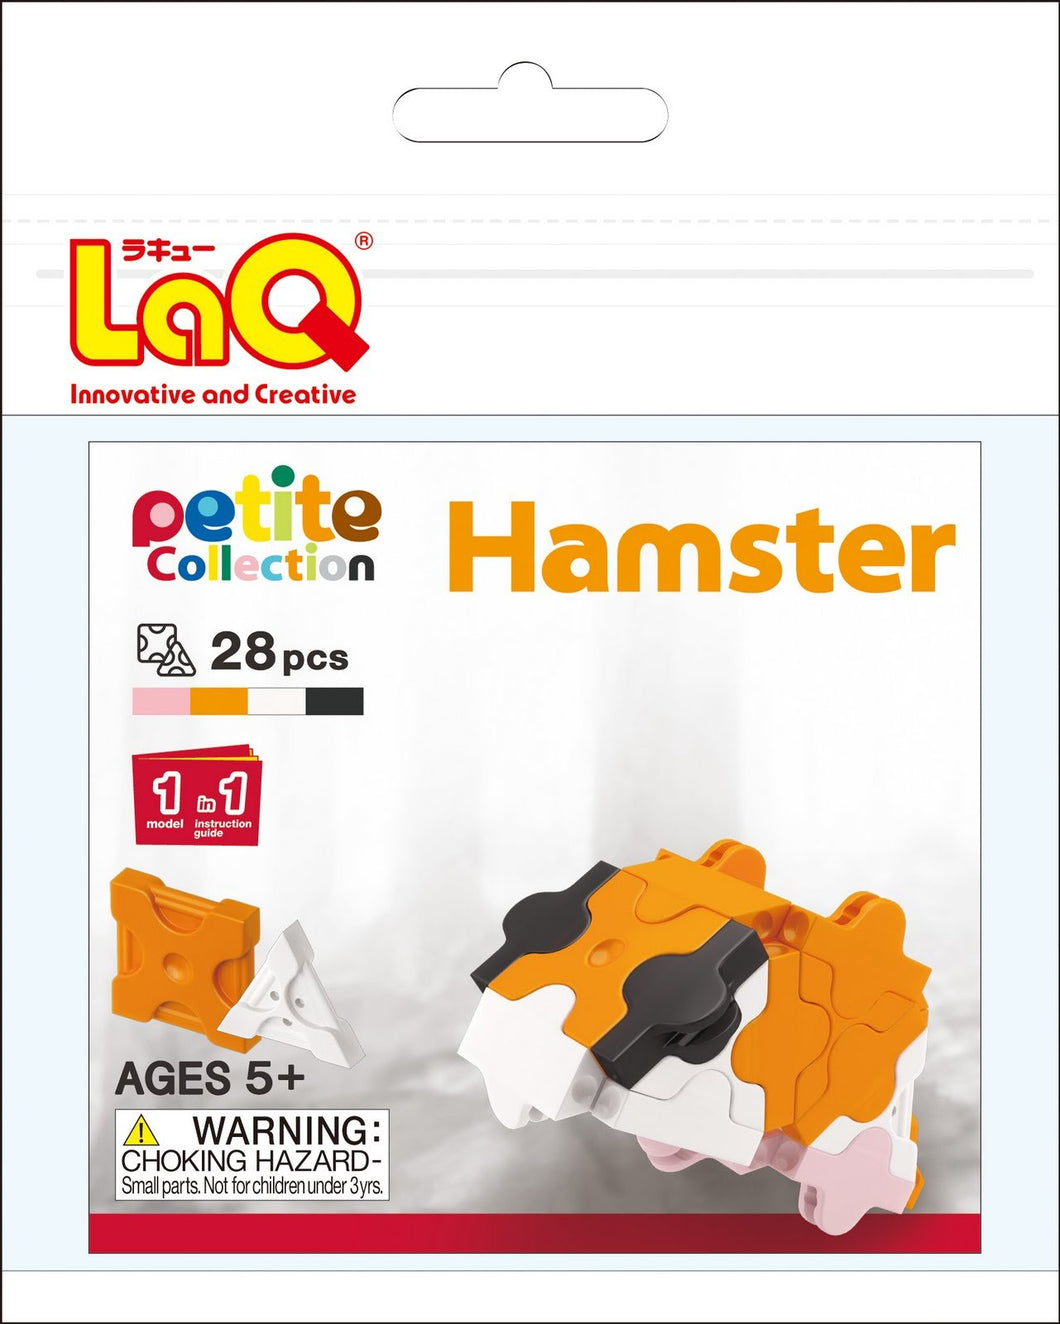 Hamster set package featured in the LaQ petite set